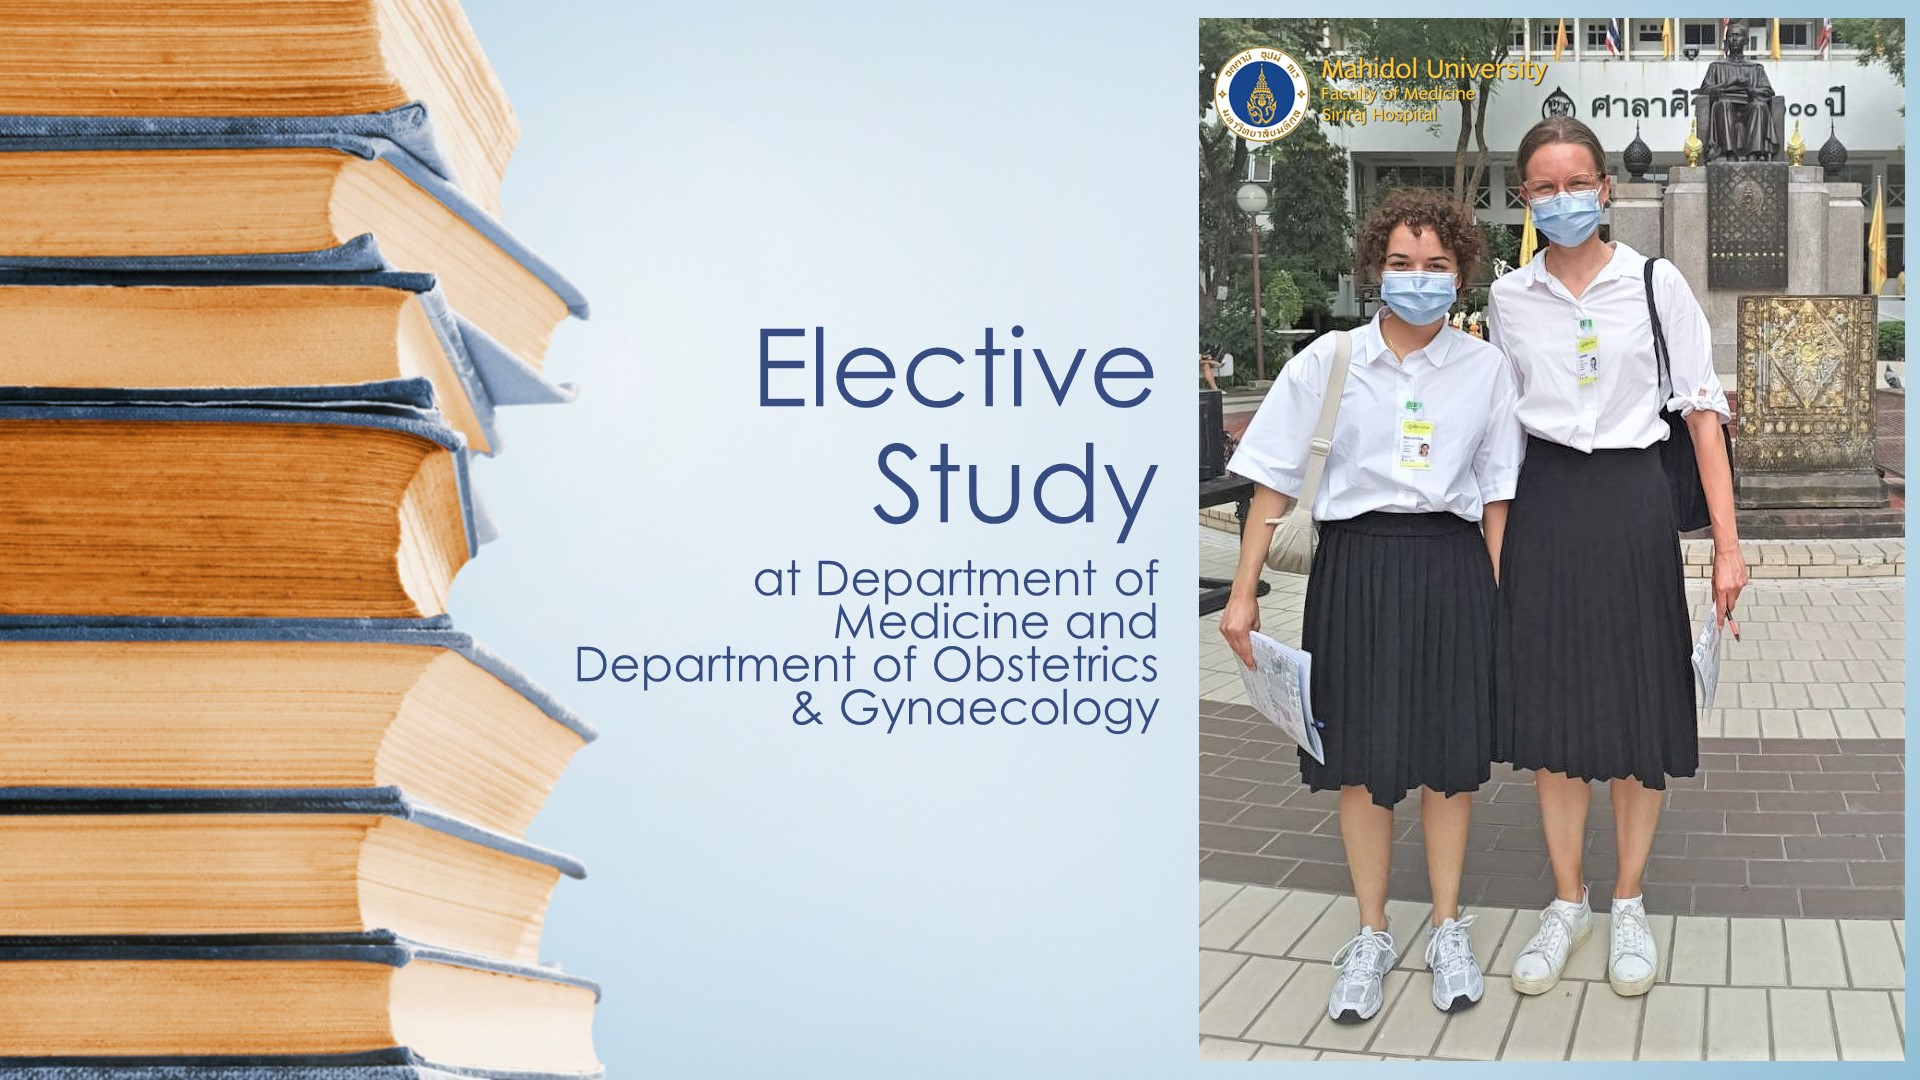 Elective Study at Department of Medicine & OBGYN